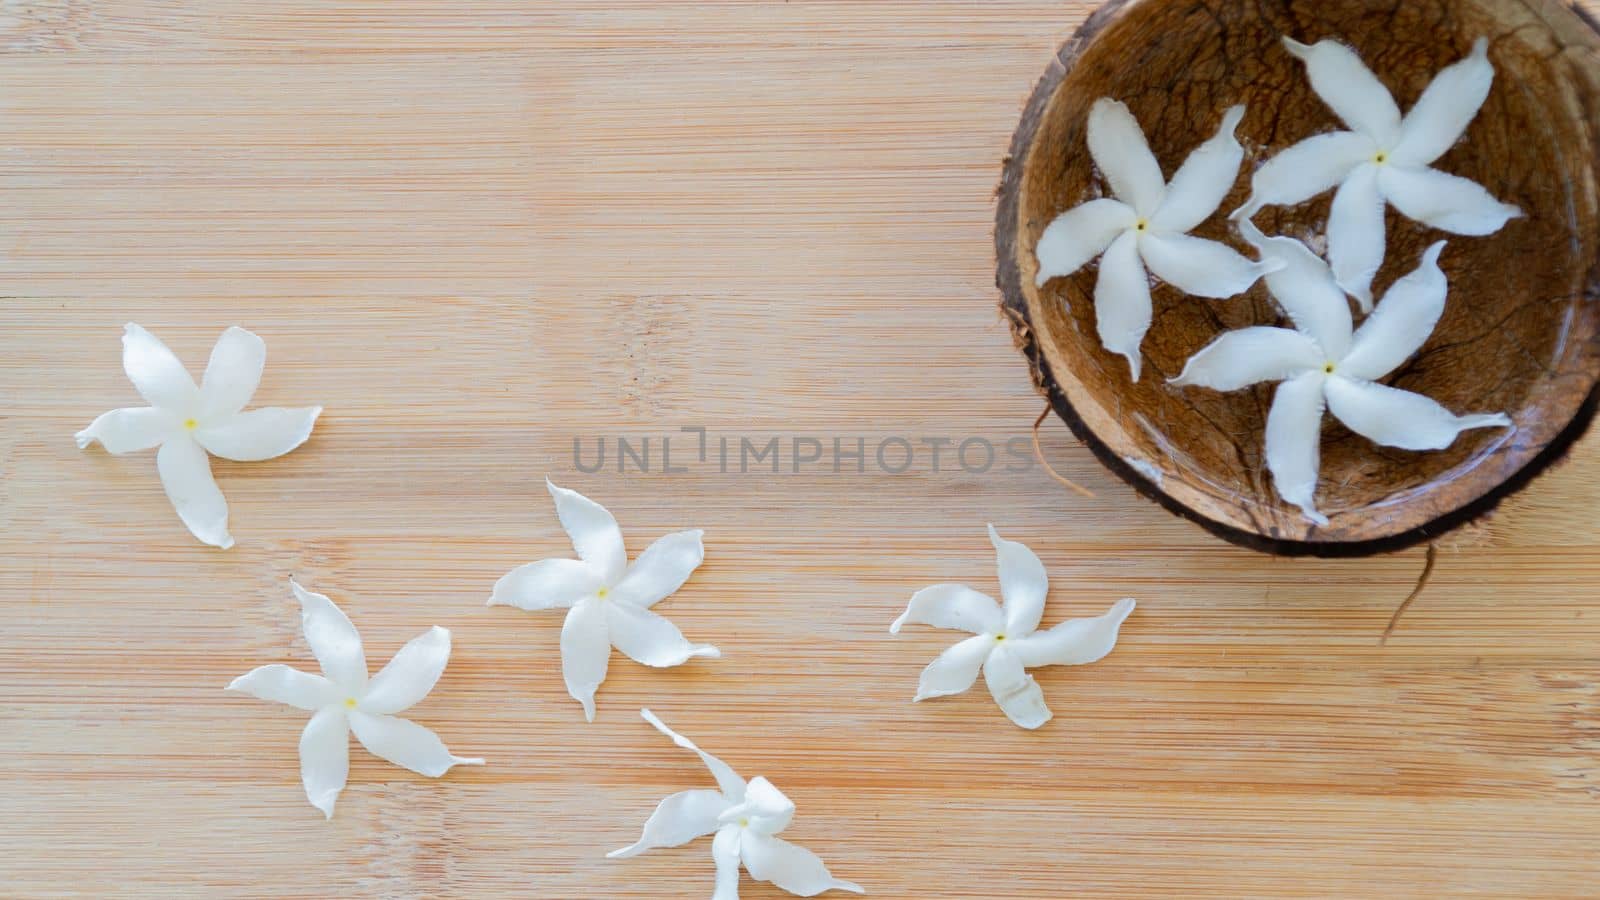 Decor of flowers, white flowers in the water in a bowl of coconut, background by voktybre